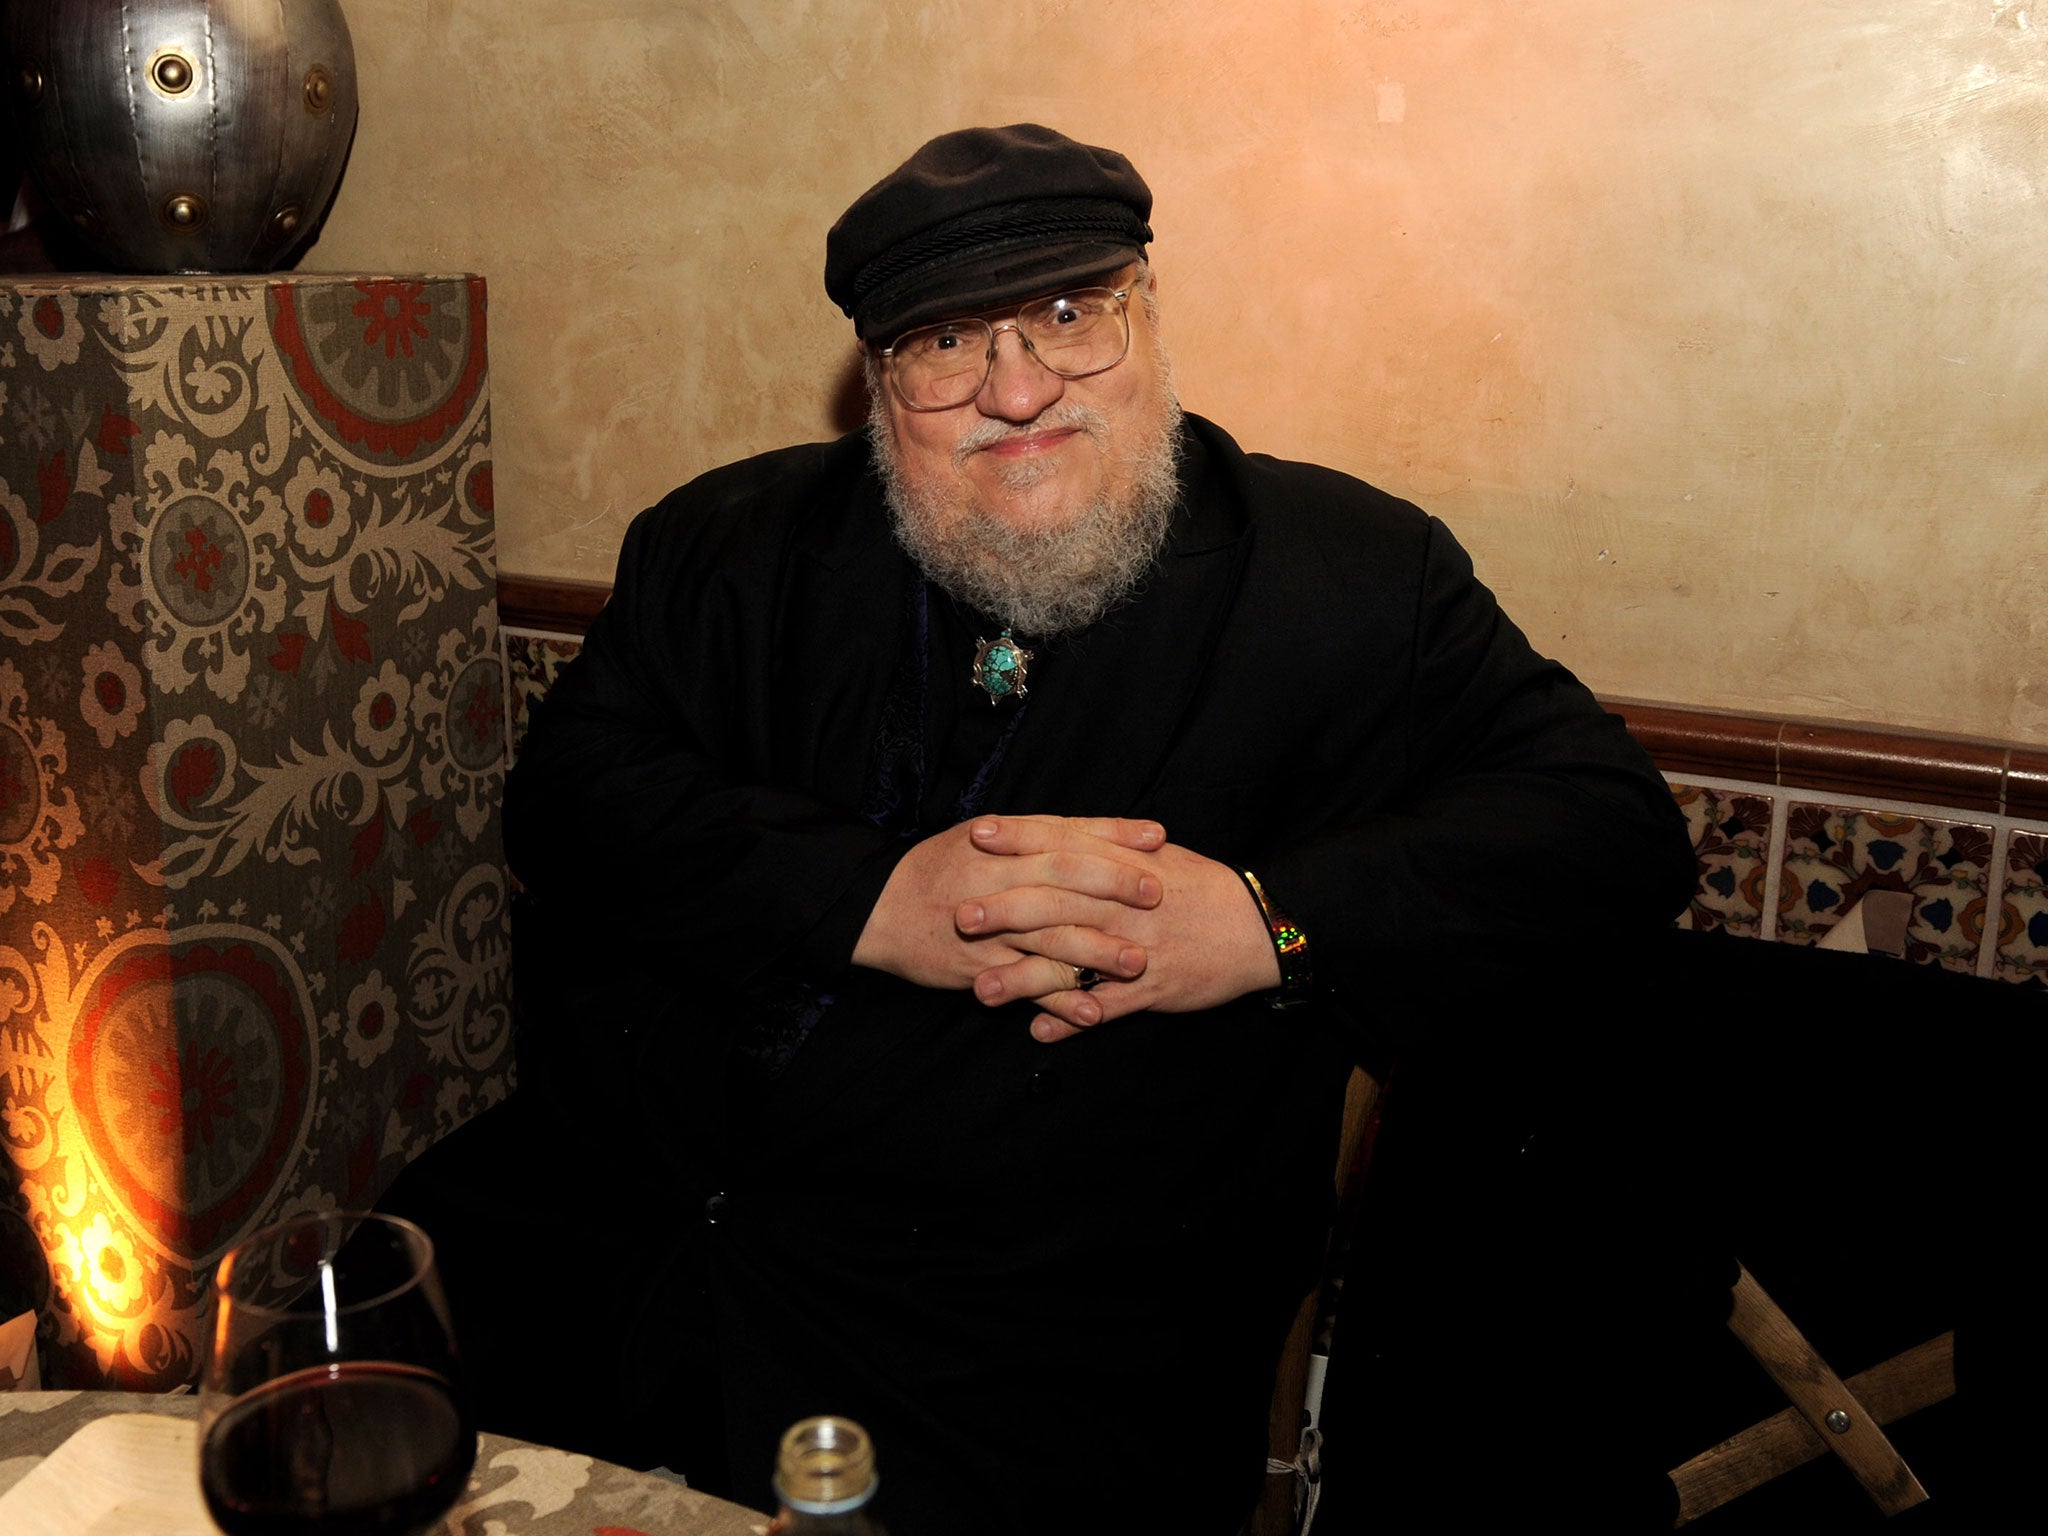 Game of Thrones author George RR Martin has a reputation for keeping fans waiting for new books